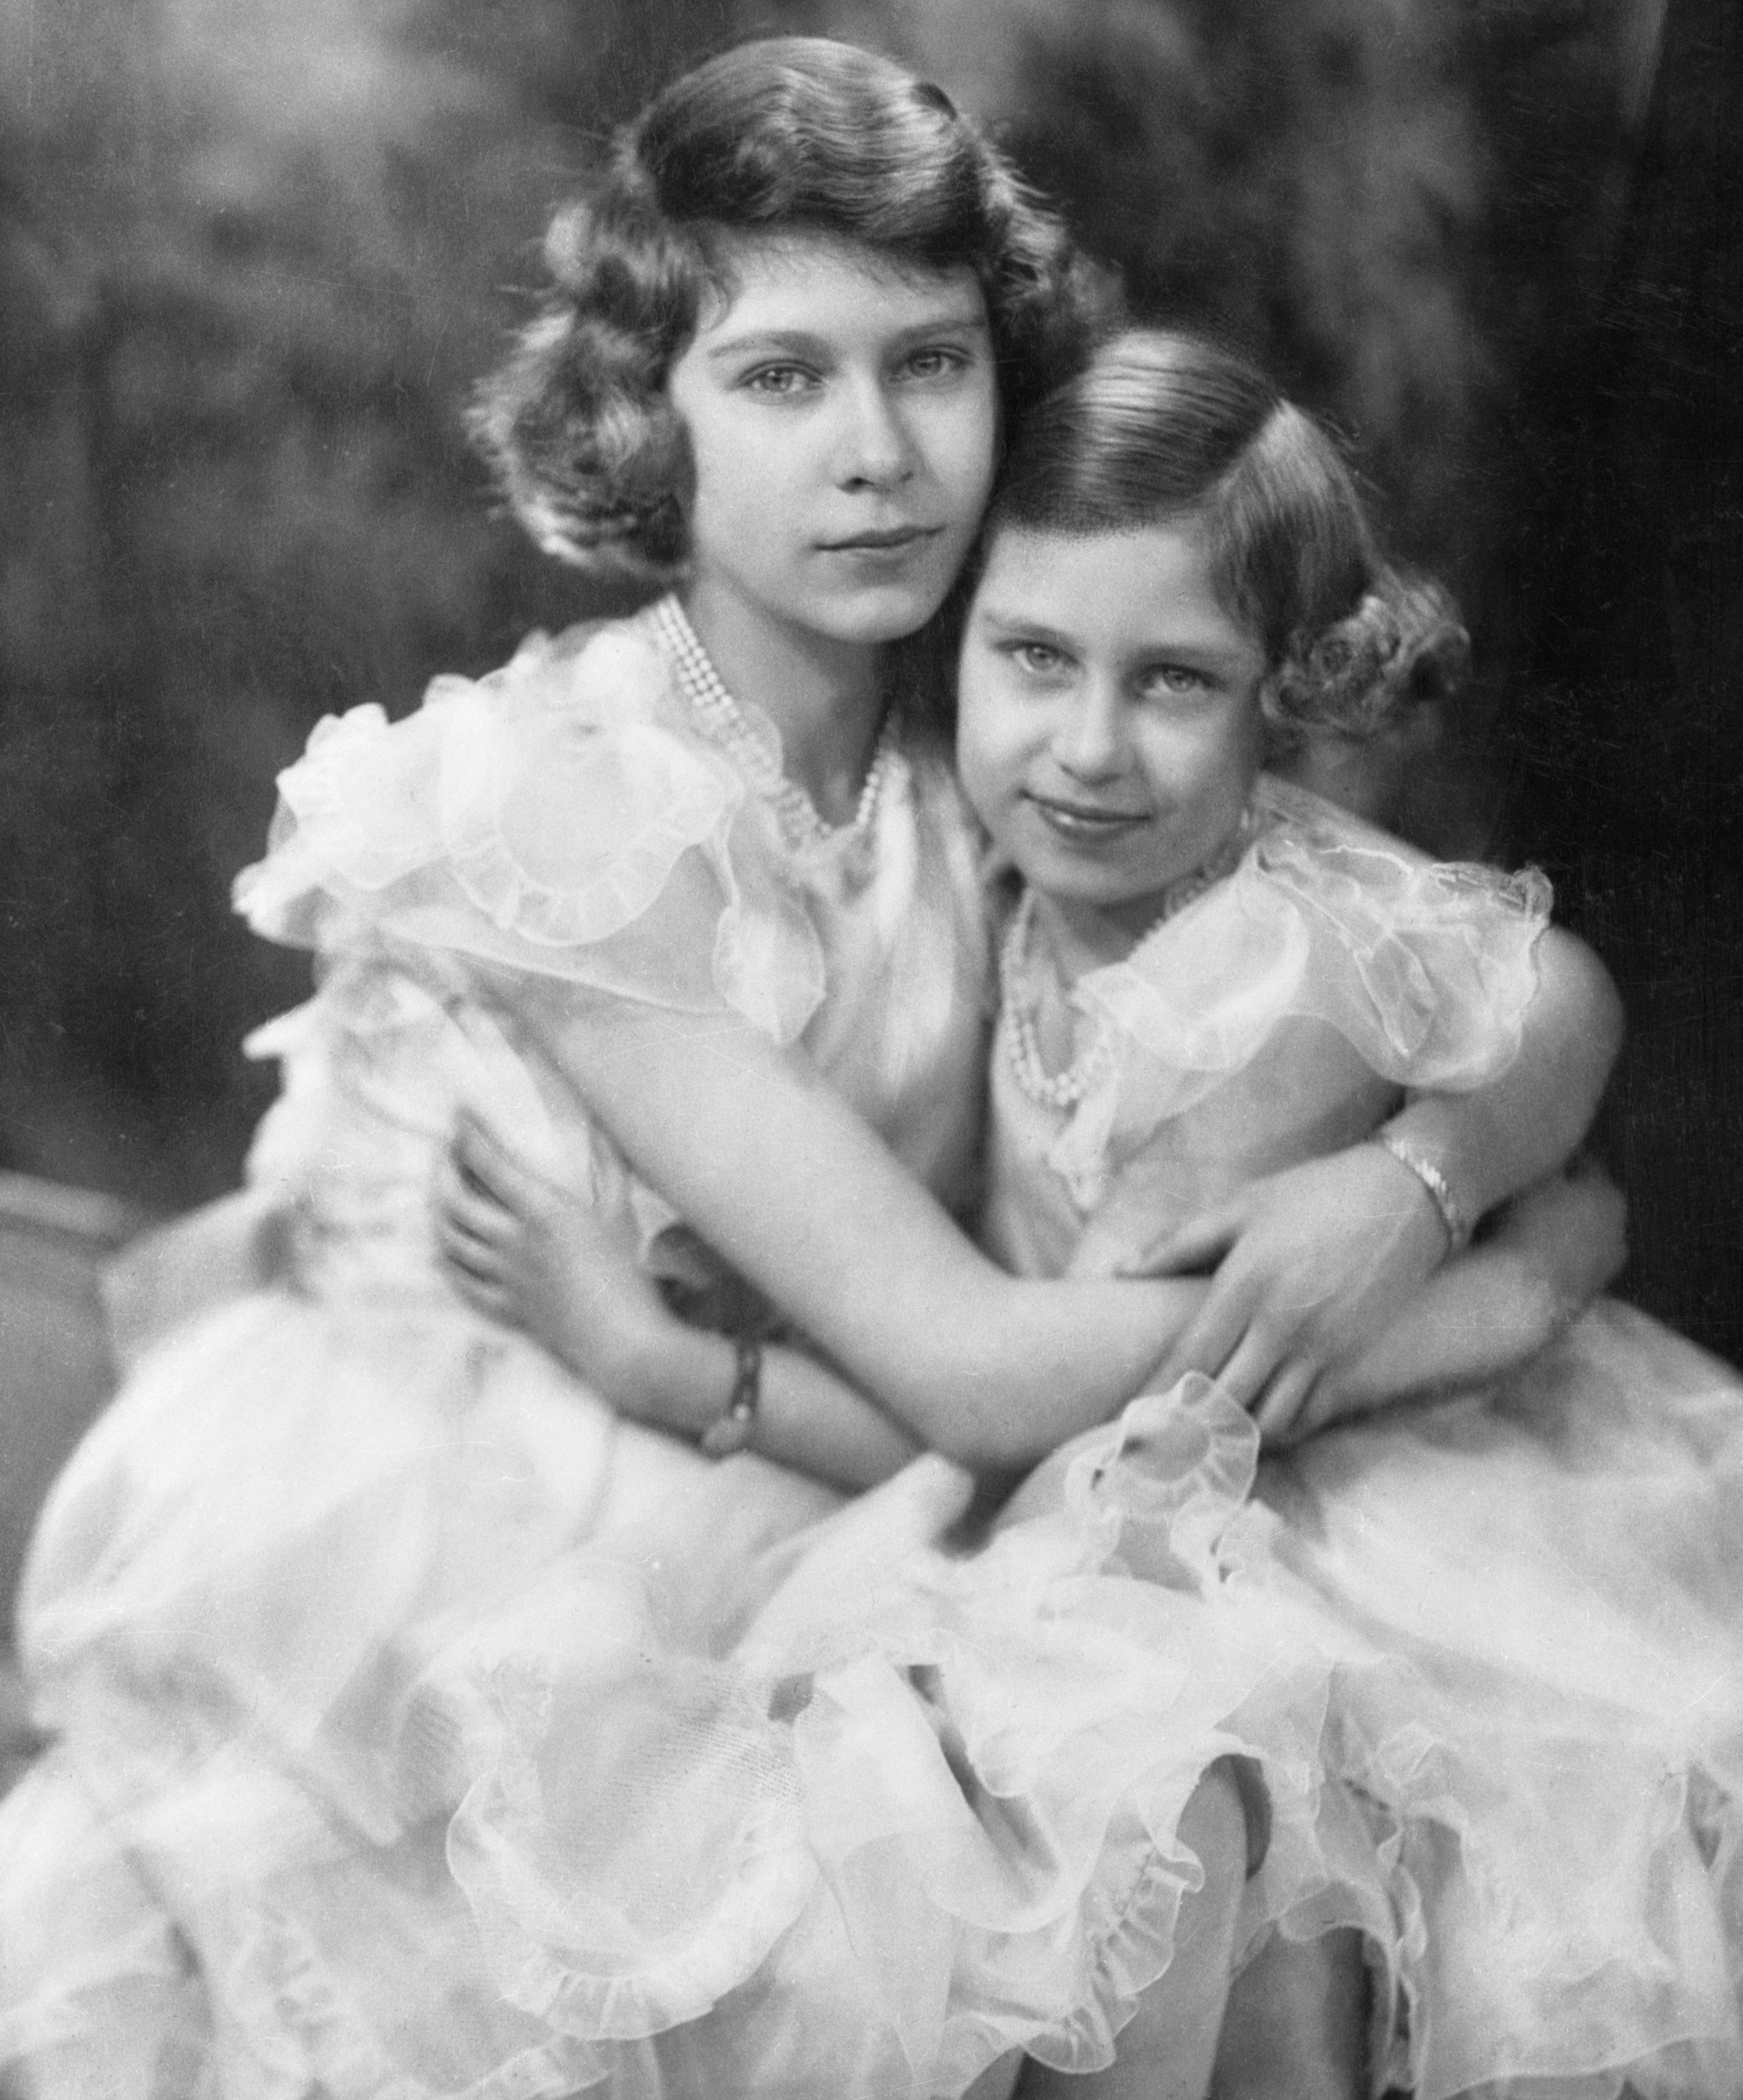 Margaret, pictured with big sister Elizabeth in a 1940 portrait, was just 15 when she underwent surgery for appendicitis at Buckingham Palace